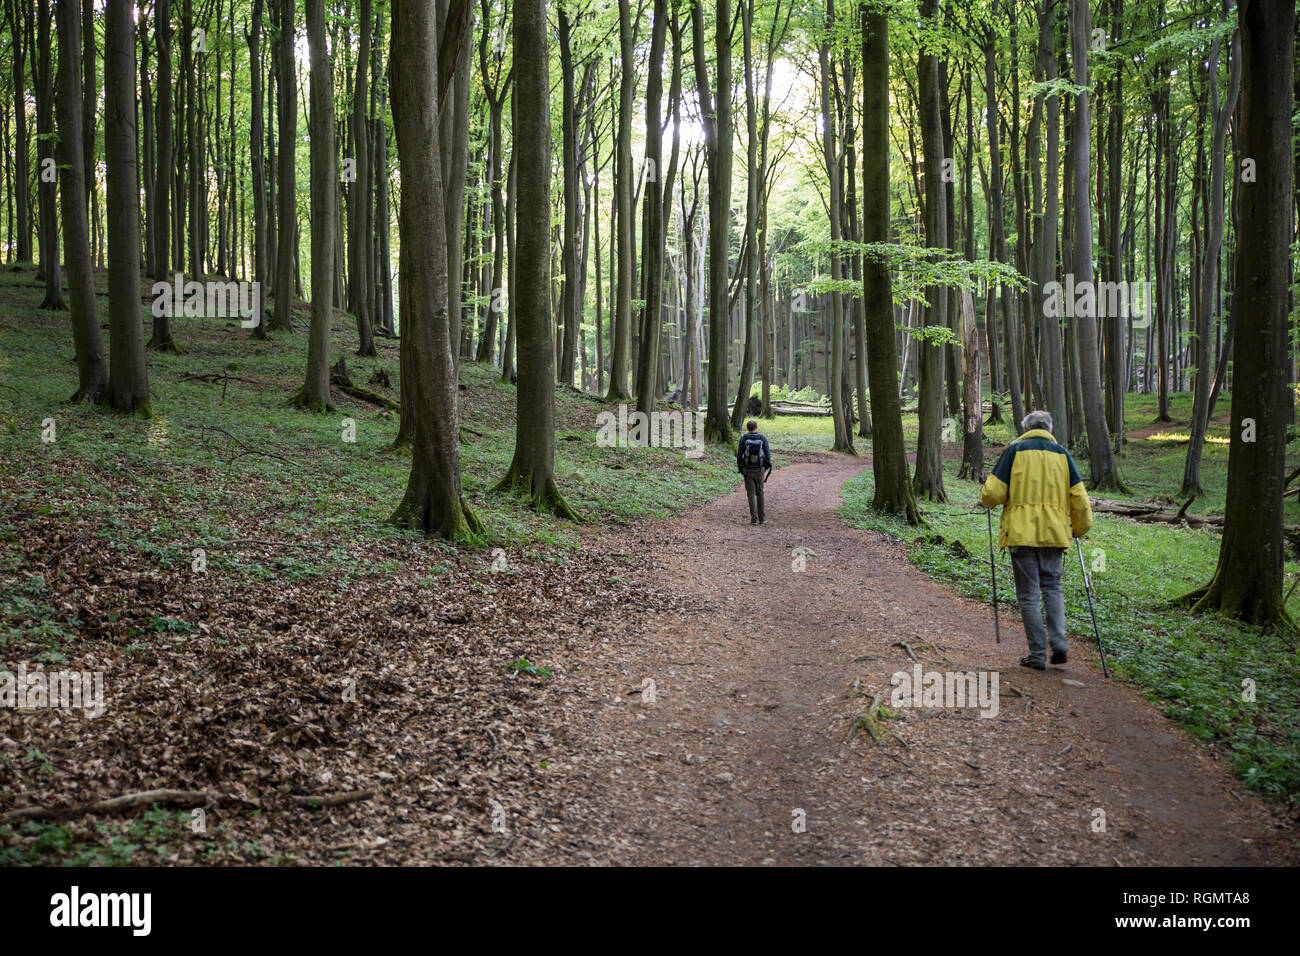 Germany, Mecklenburg-Western Pomerania, Ruegen, Jasmund National Park, hikers in beech forest on hiking trail Stock Photo